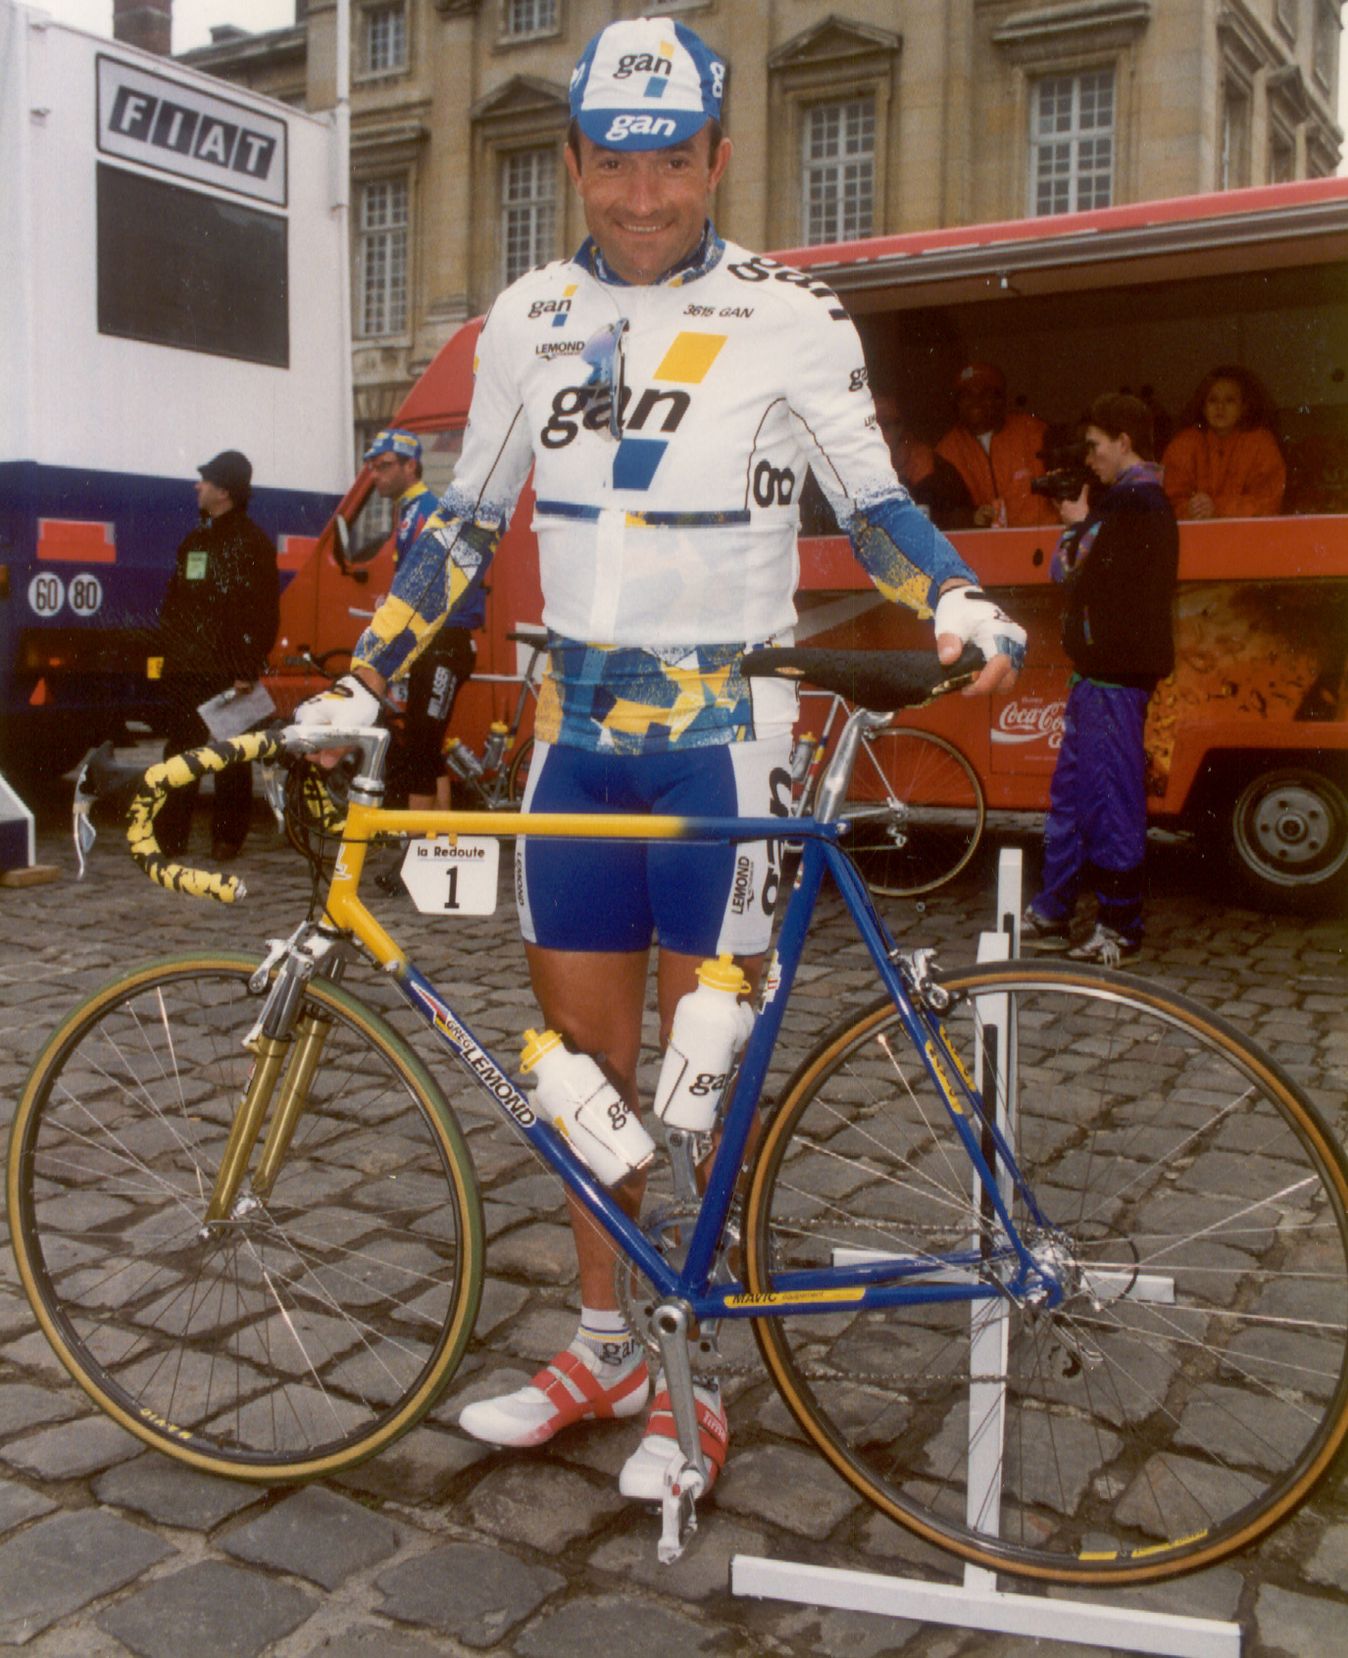 Gilbert Duclos-Lassalle and the LeMond bike of GAN complete with RockShox forks